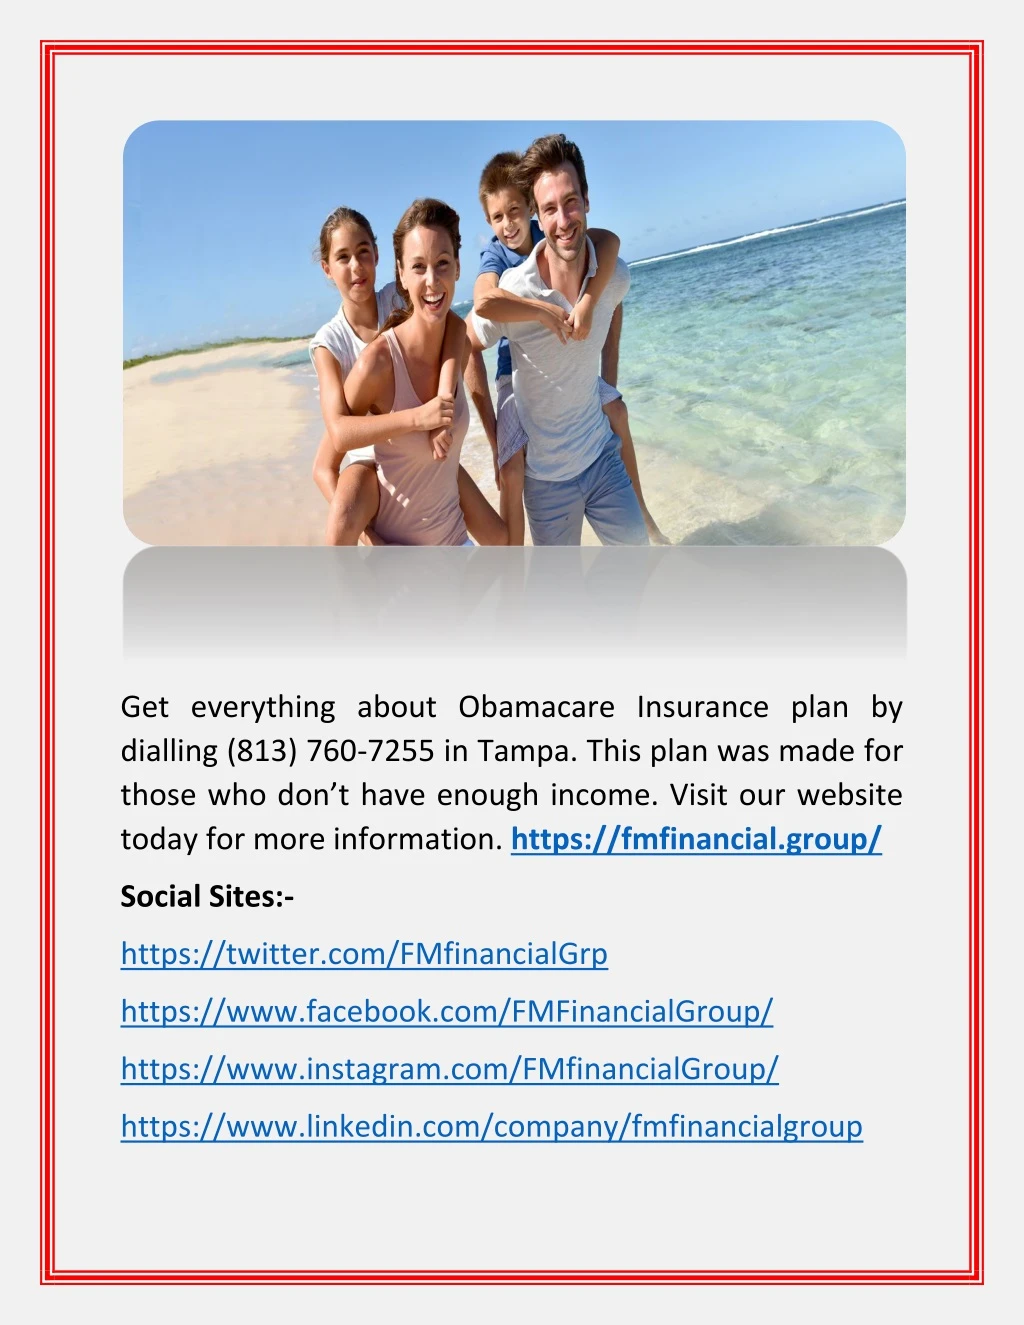 get everything about obamacare insurance plan